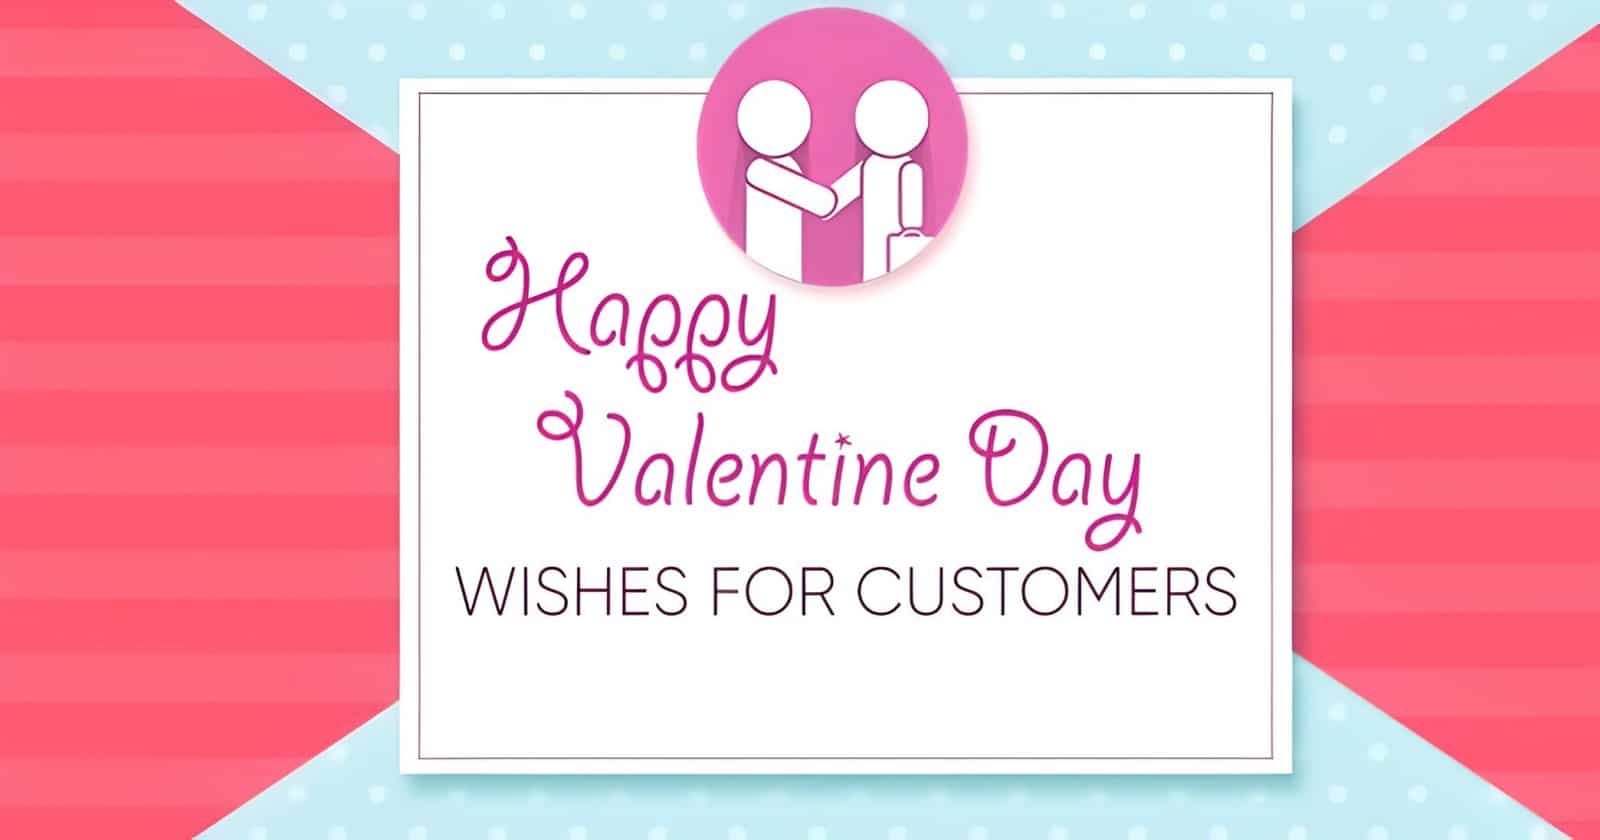 Valentine's Day Messages and Wishes for Customers/Clients